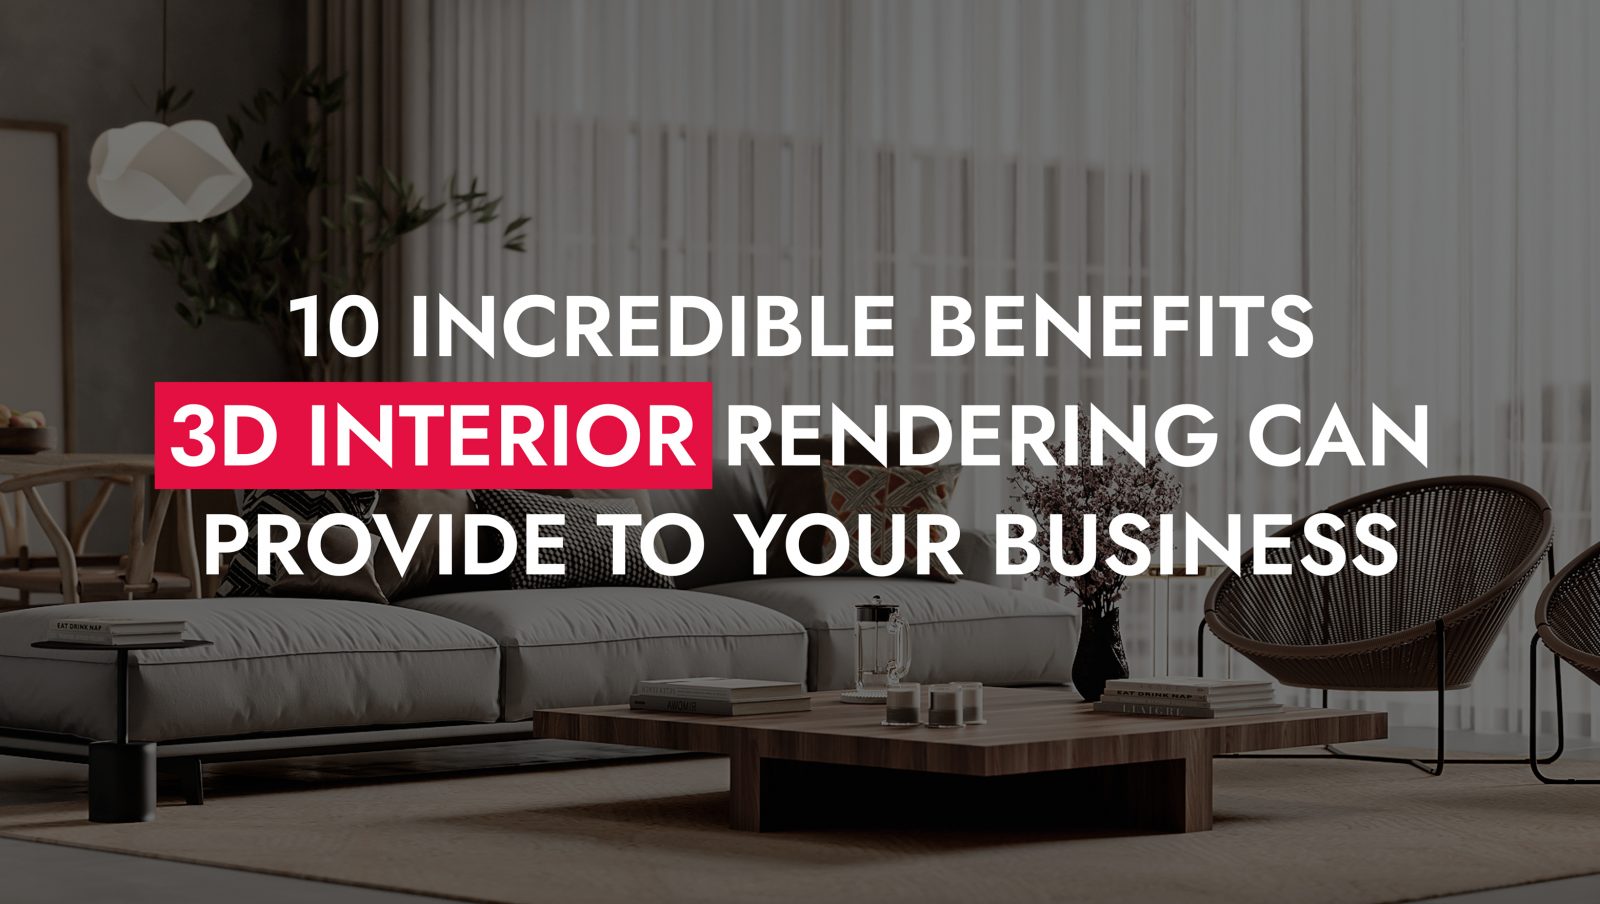 10 Incredible Benefits 3D Interior Renderings Can Provide To Your Business